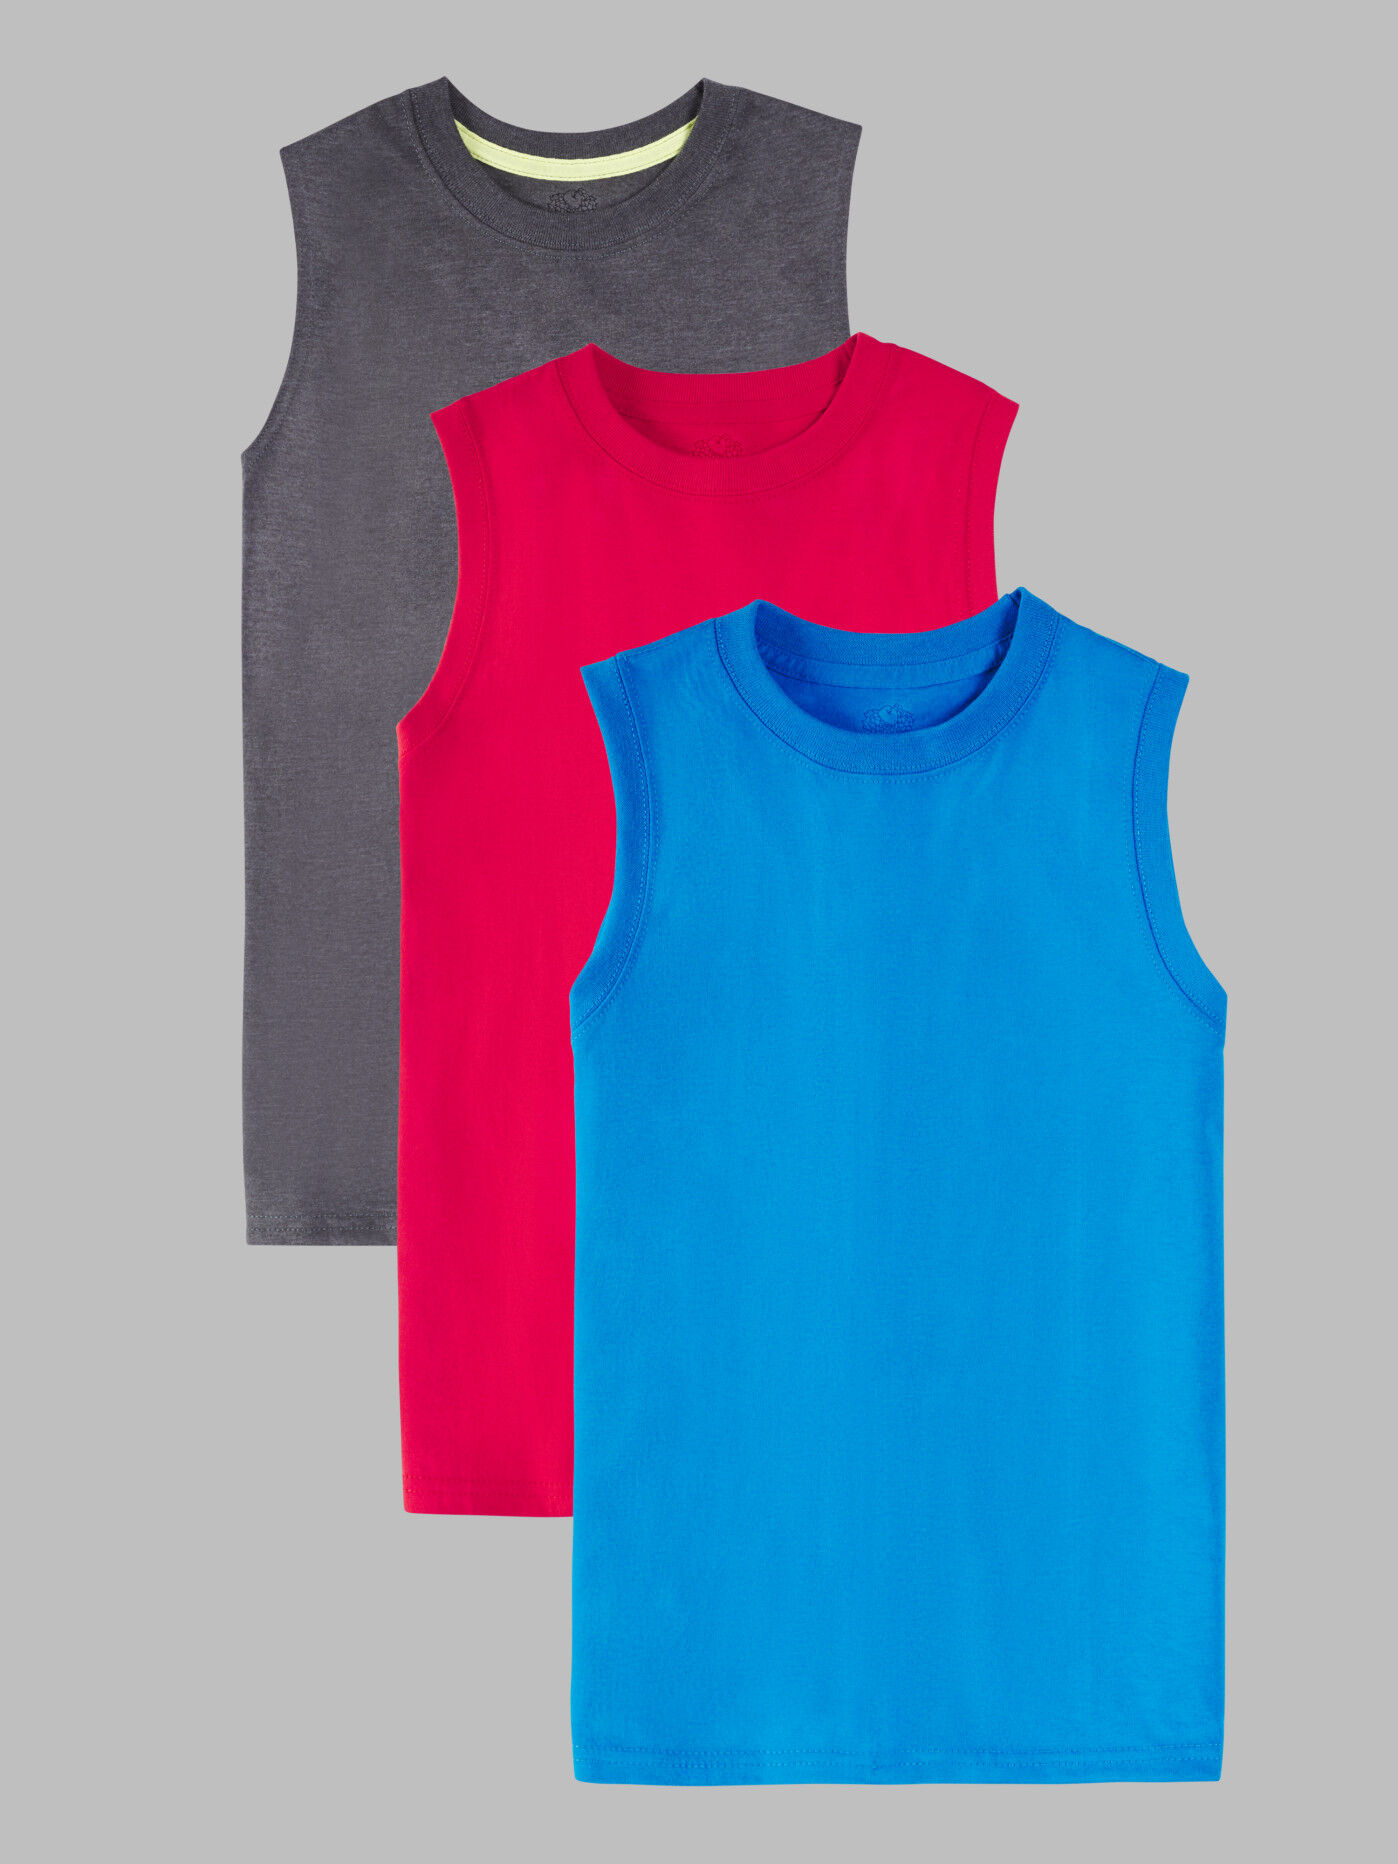 Boys' Super Soft Solid Multi-Color Sleeveless Muscle Shirts